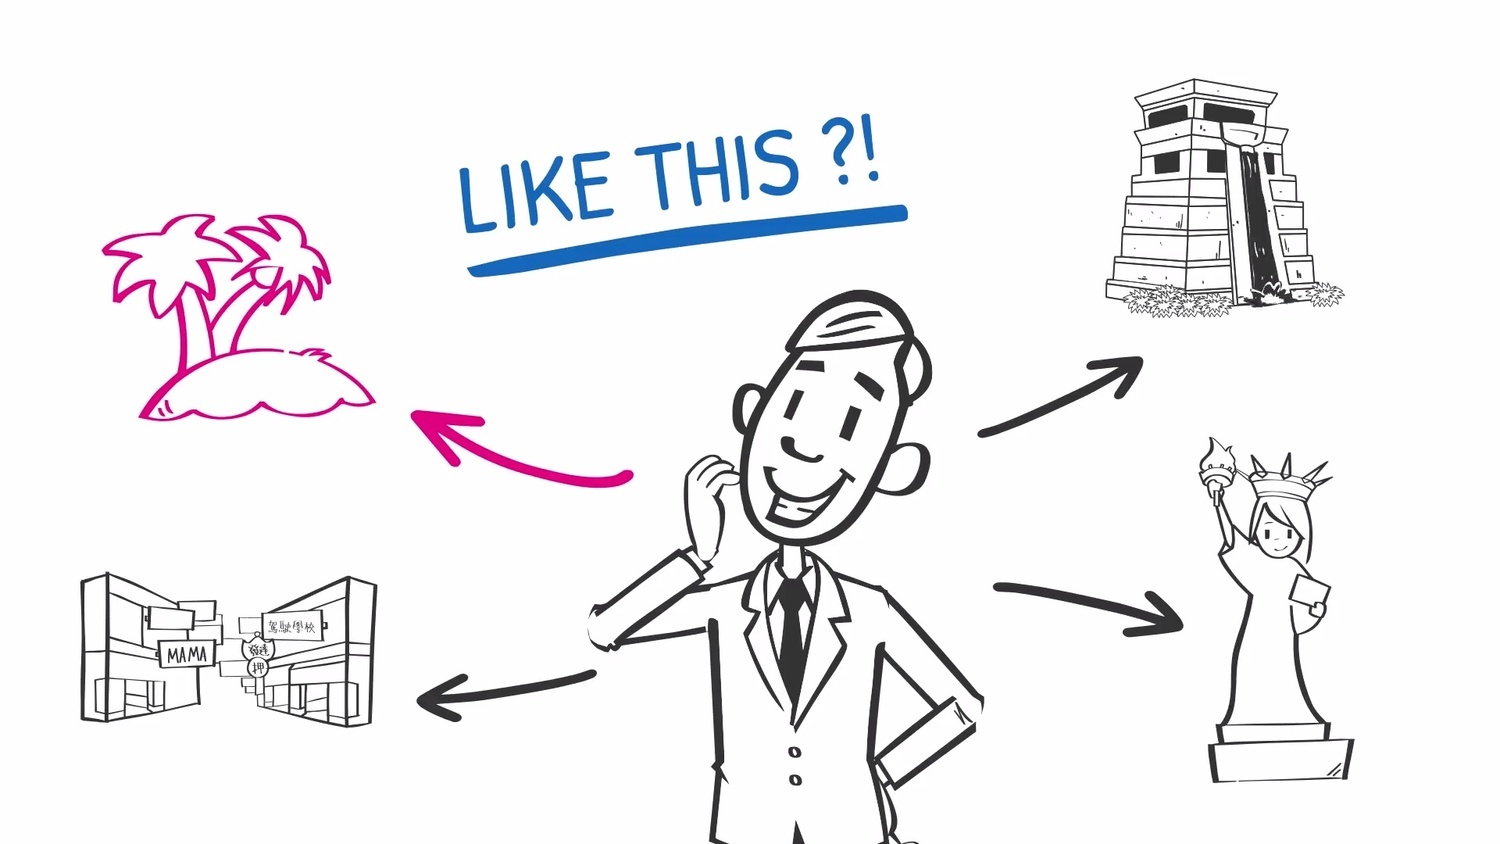 Speed Drawing Video: World-Class Whiteboard Animation